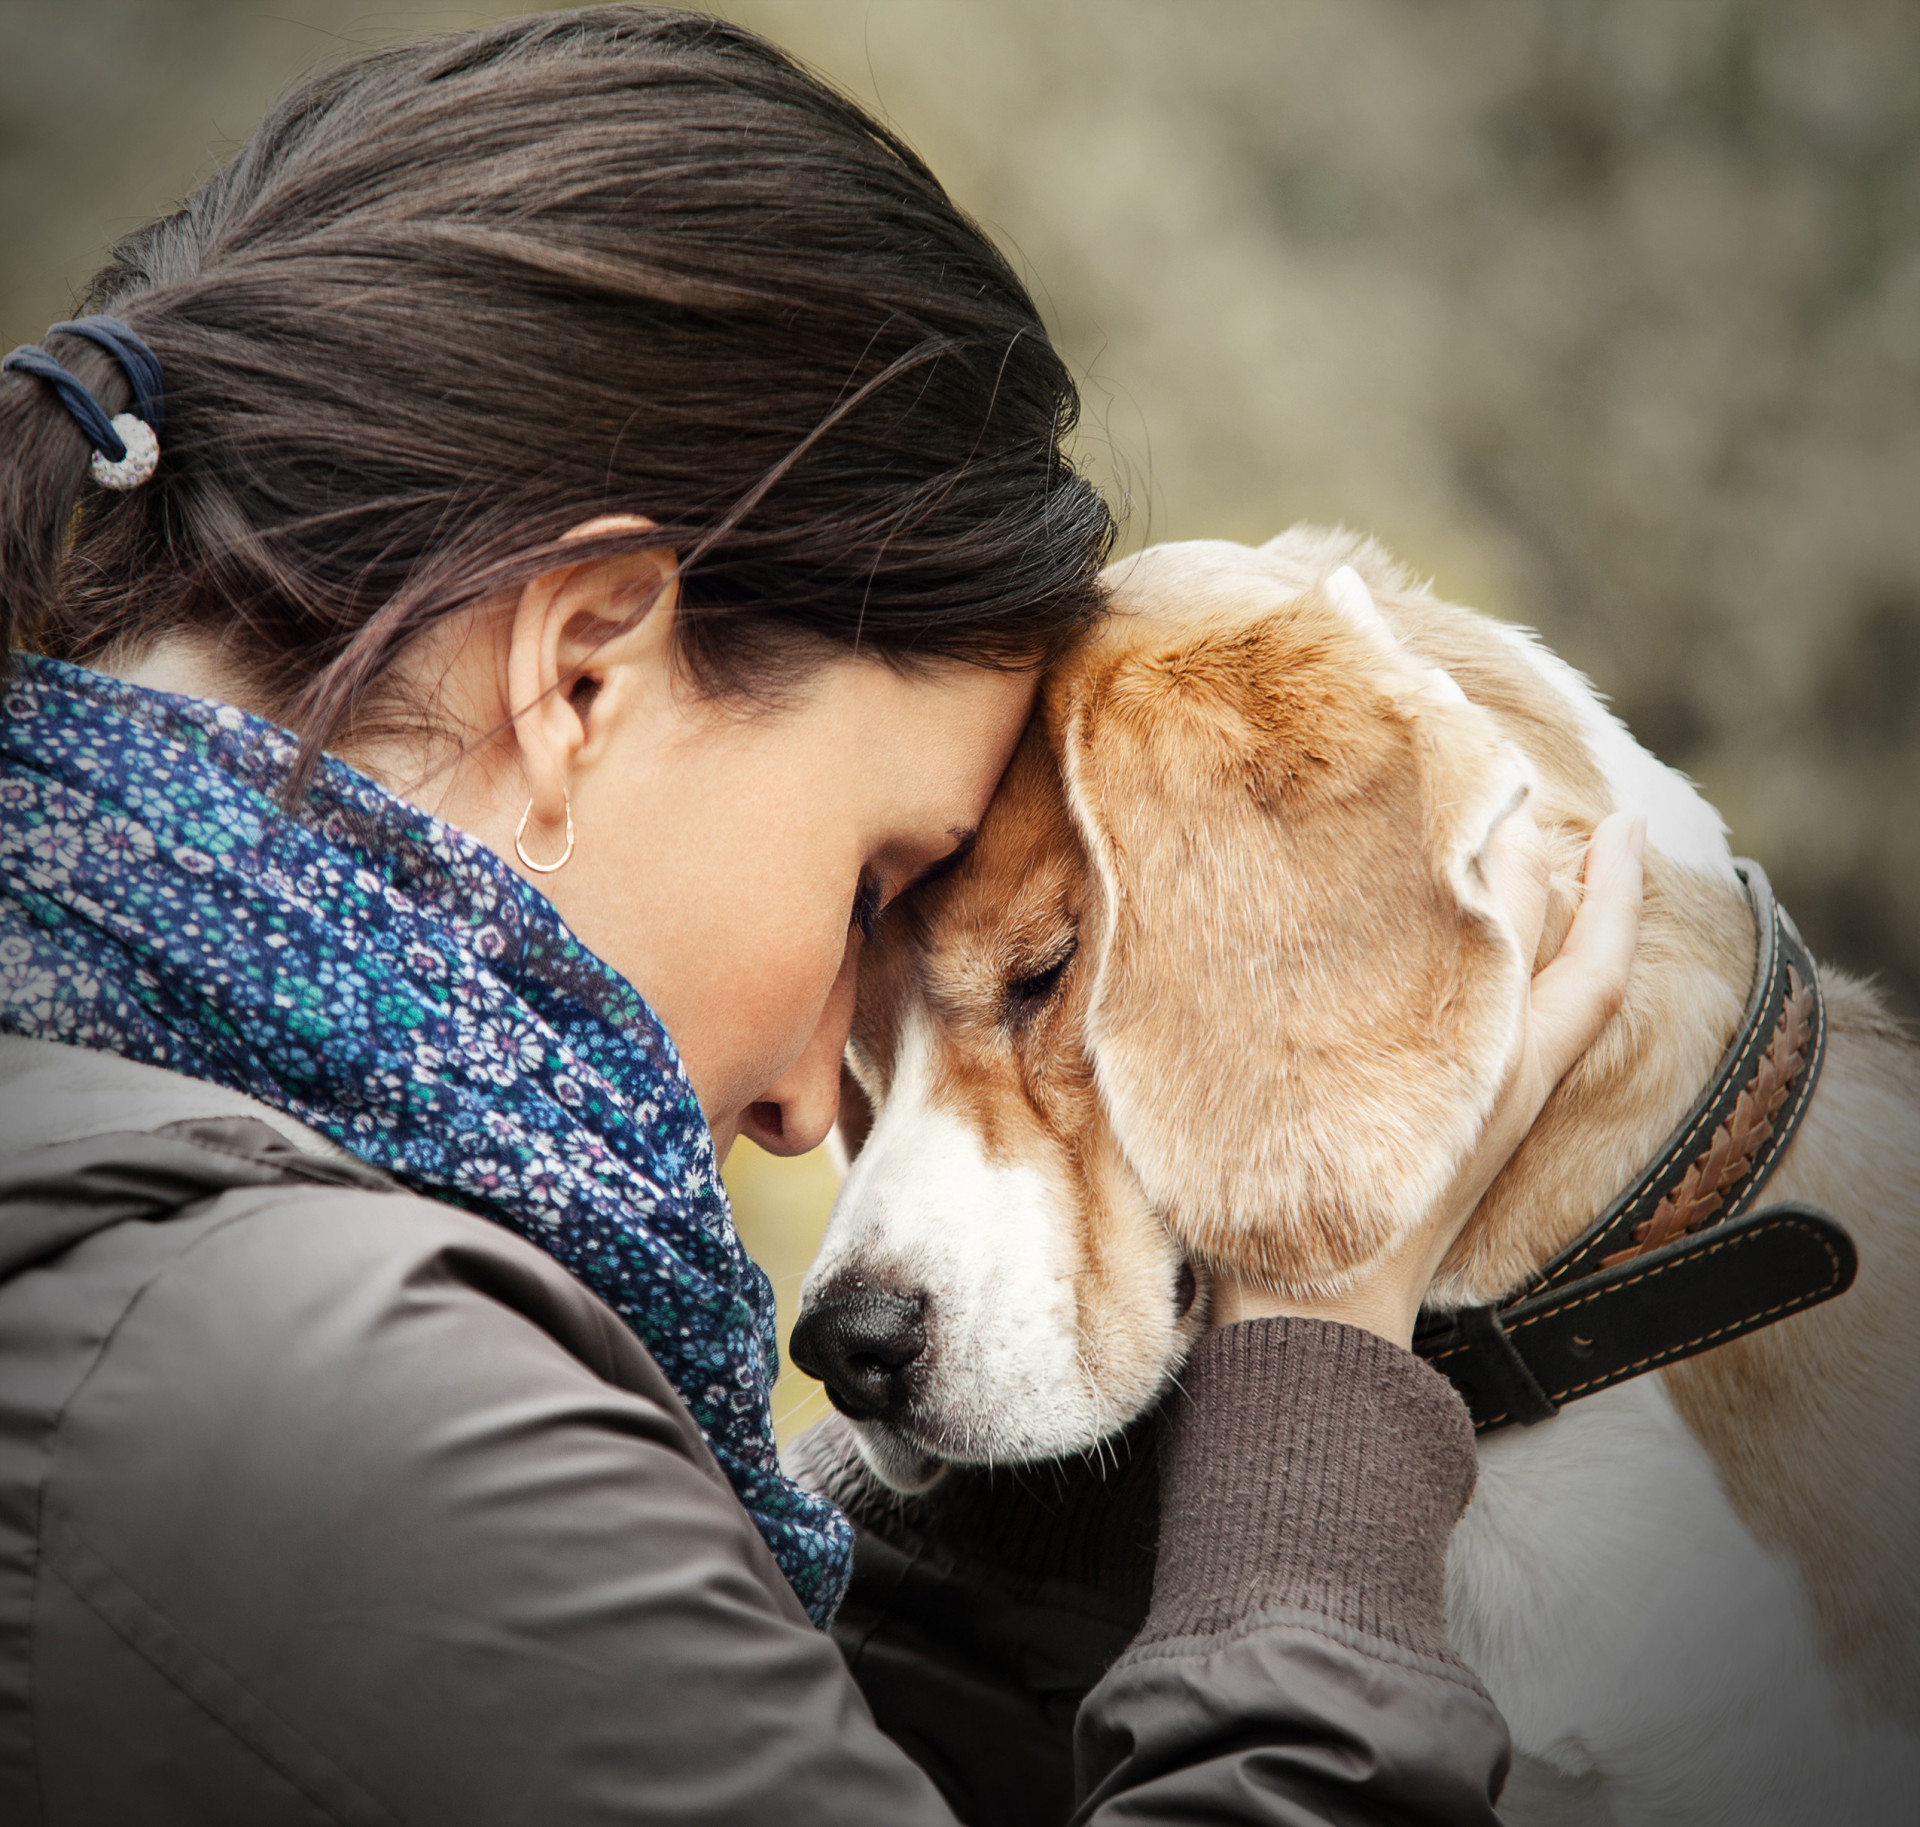 How these dog breeds can help you cope with depression